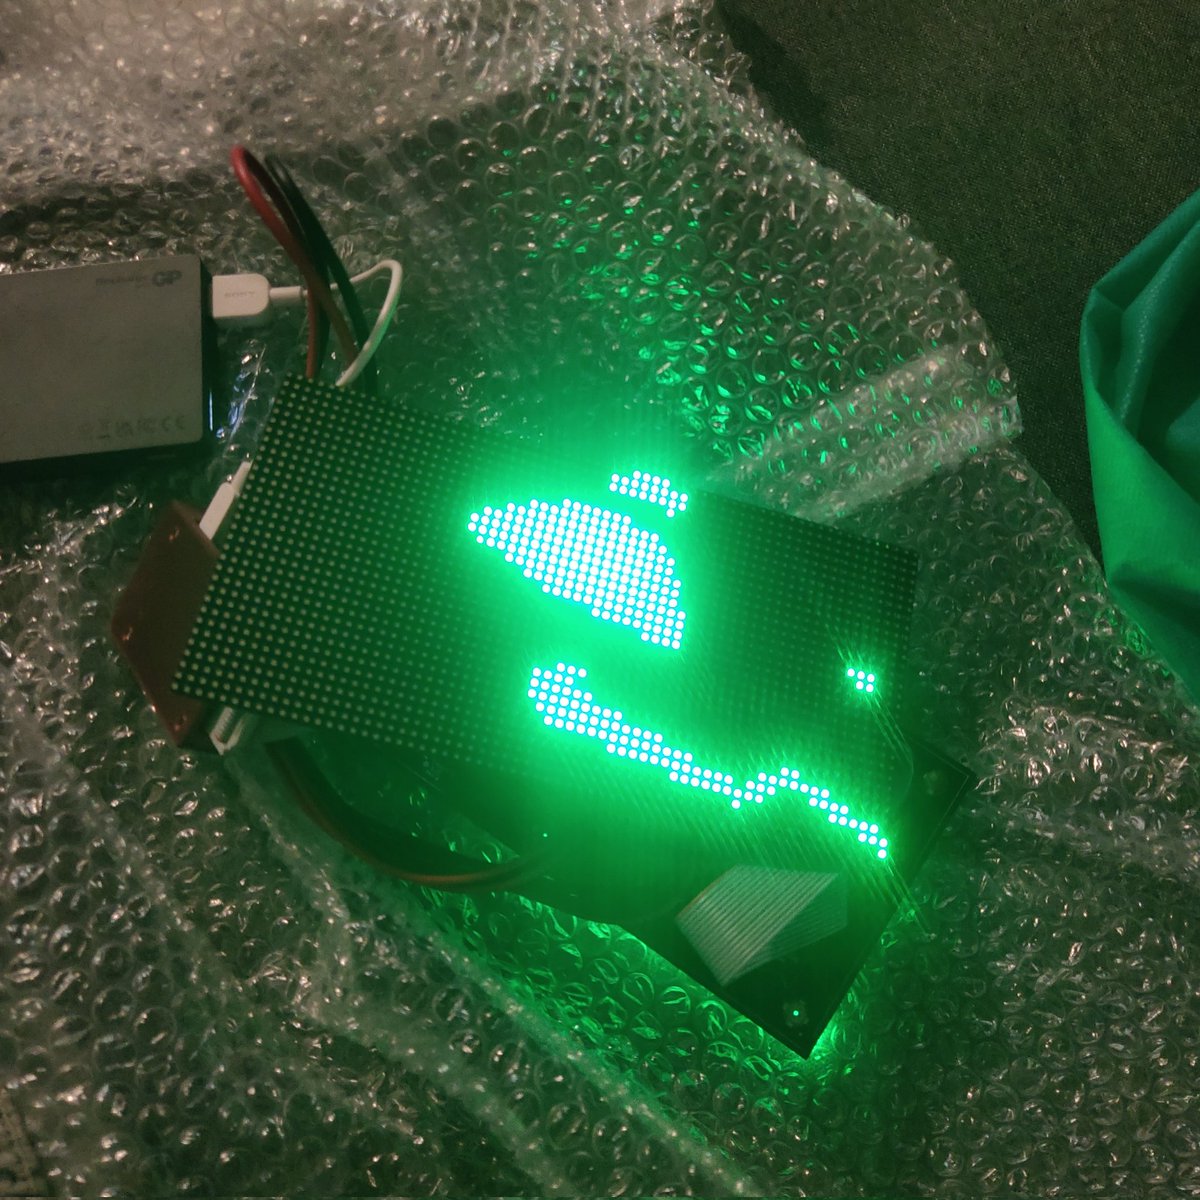 New leds for my suit X3